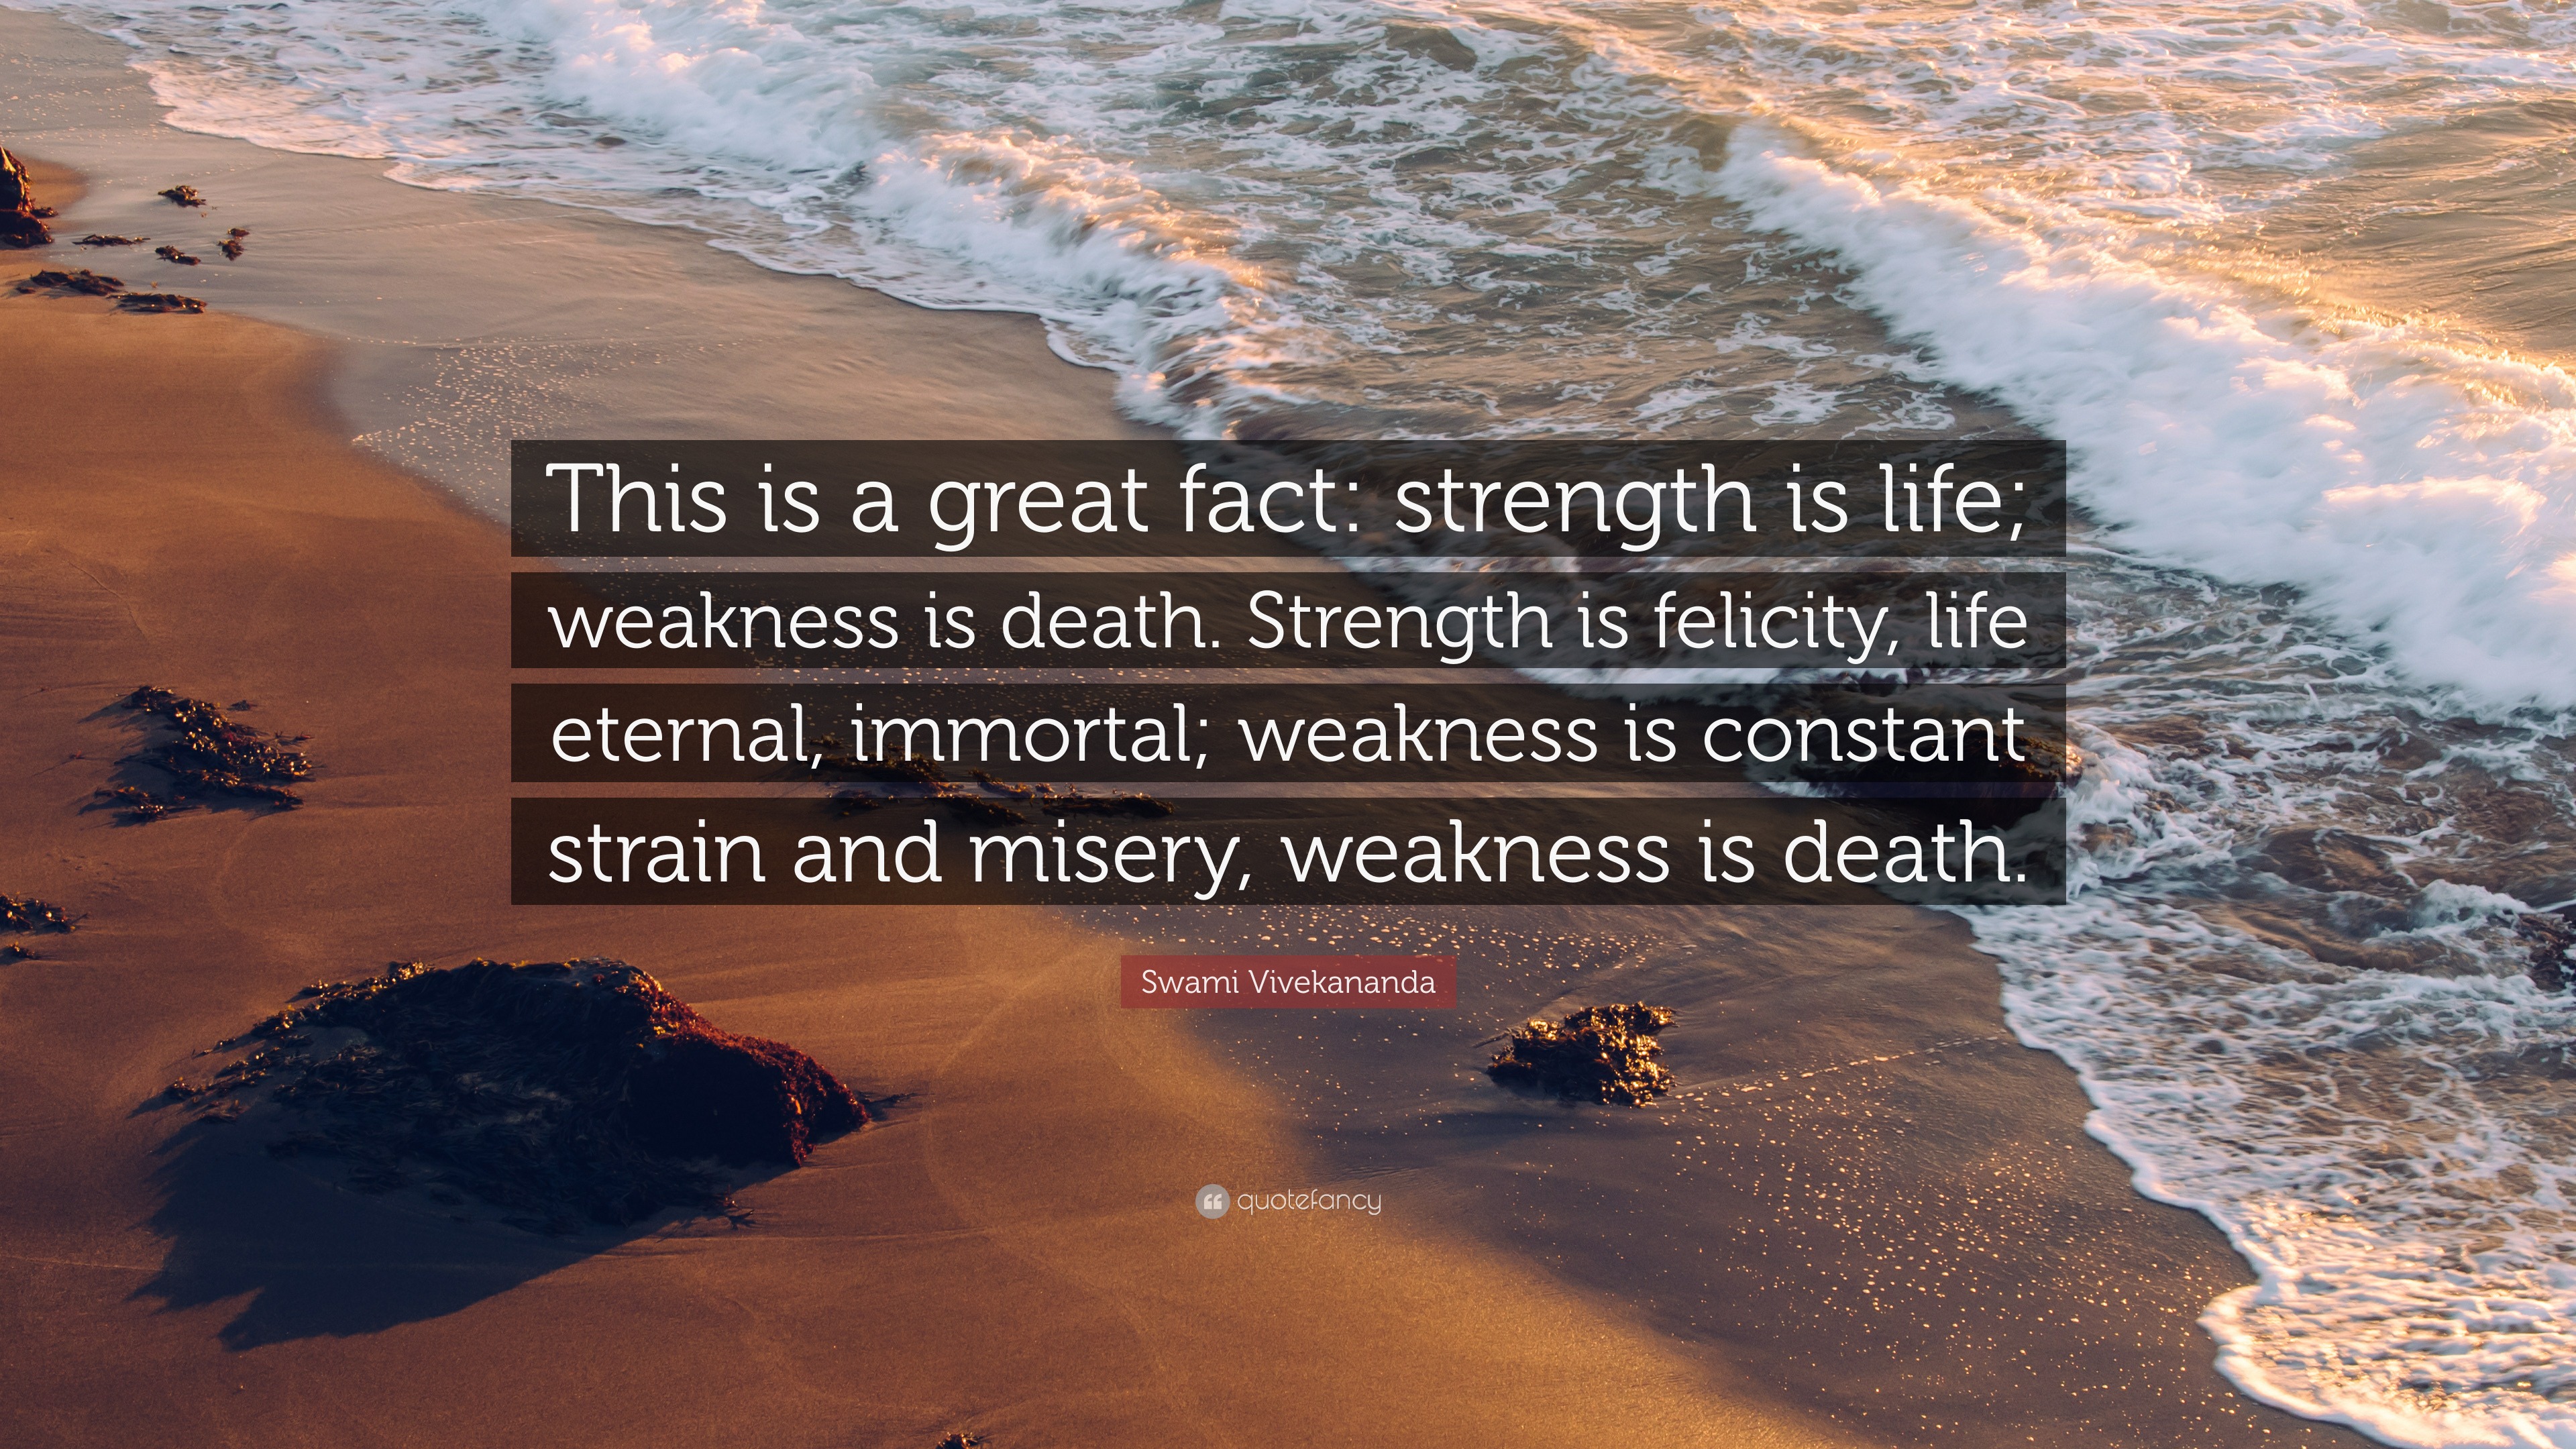 Swami Vivekananda Quote “This is a great fact strength is life weakness